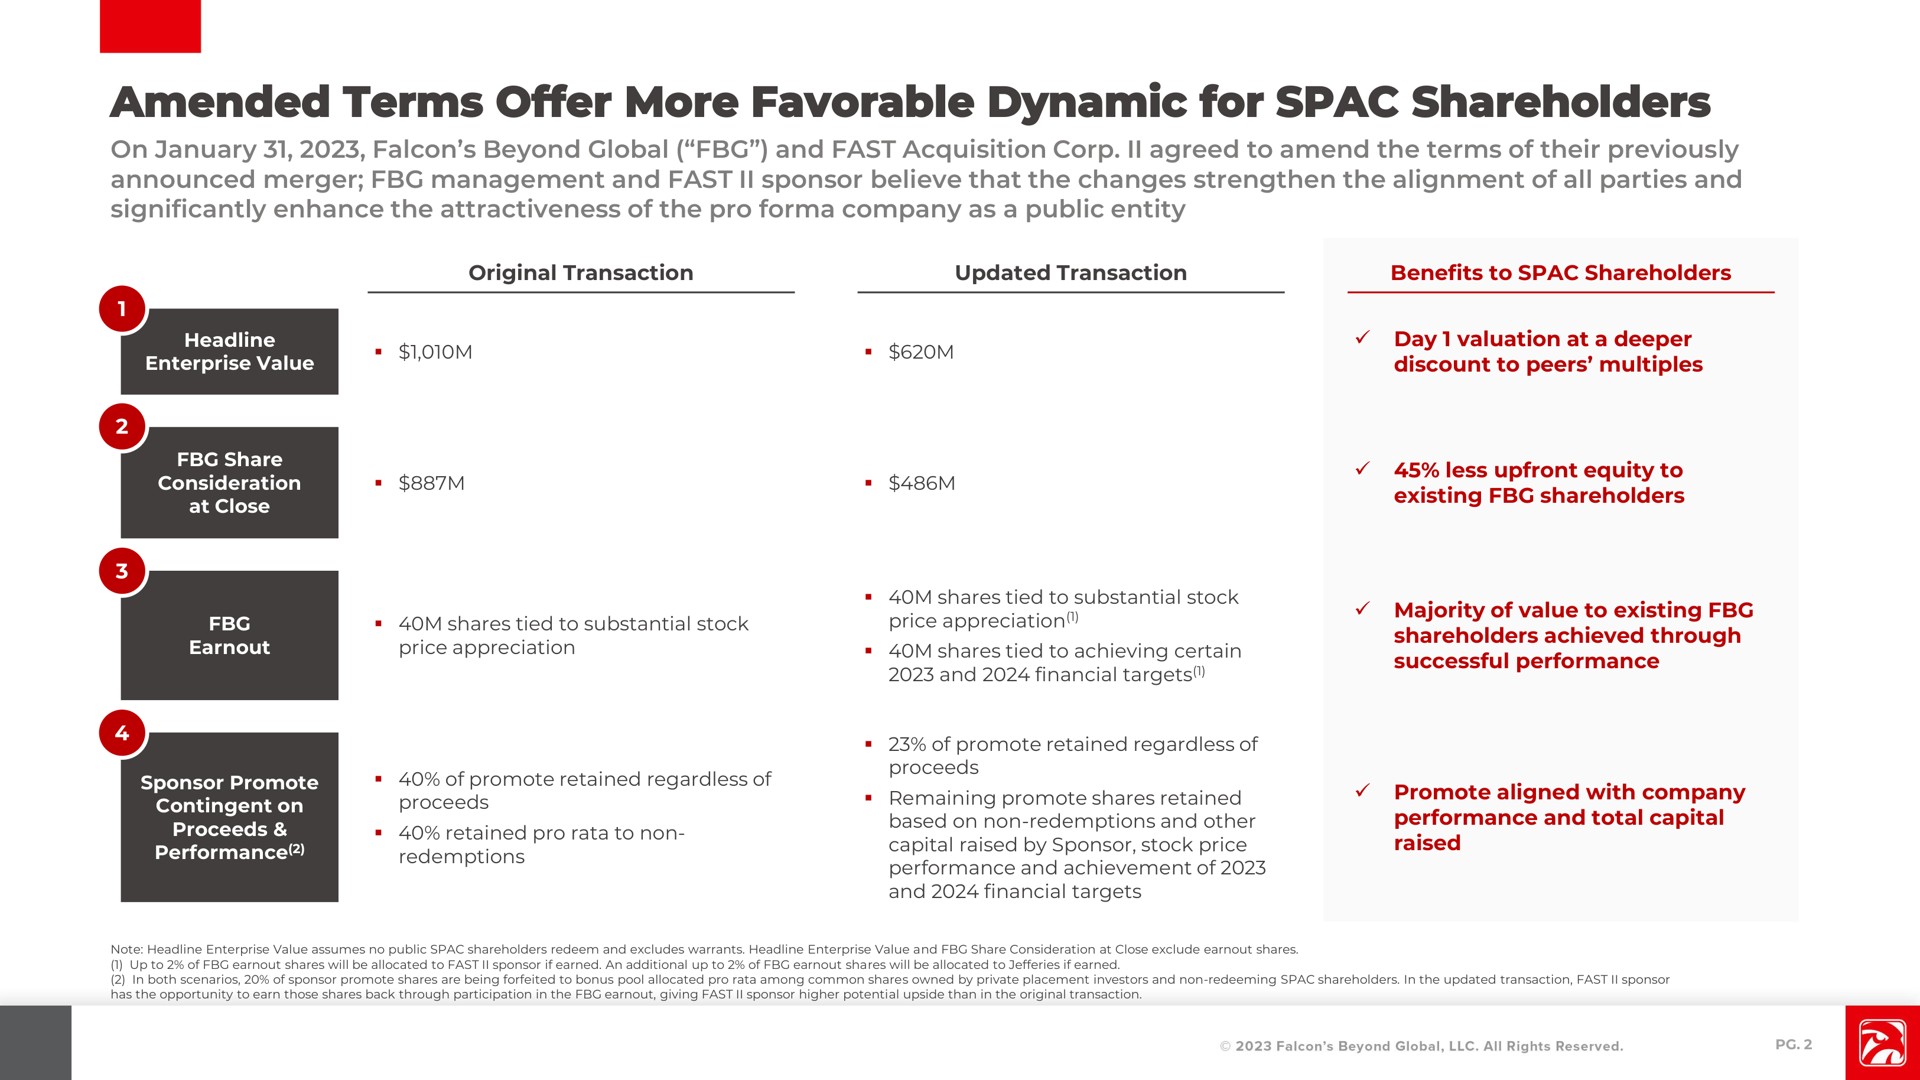 amended terms offer more favorable dynamic for shareholders | Falcon's Beyond